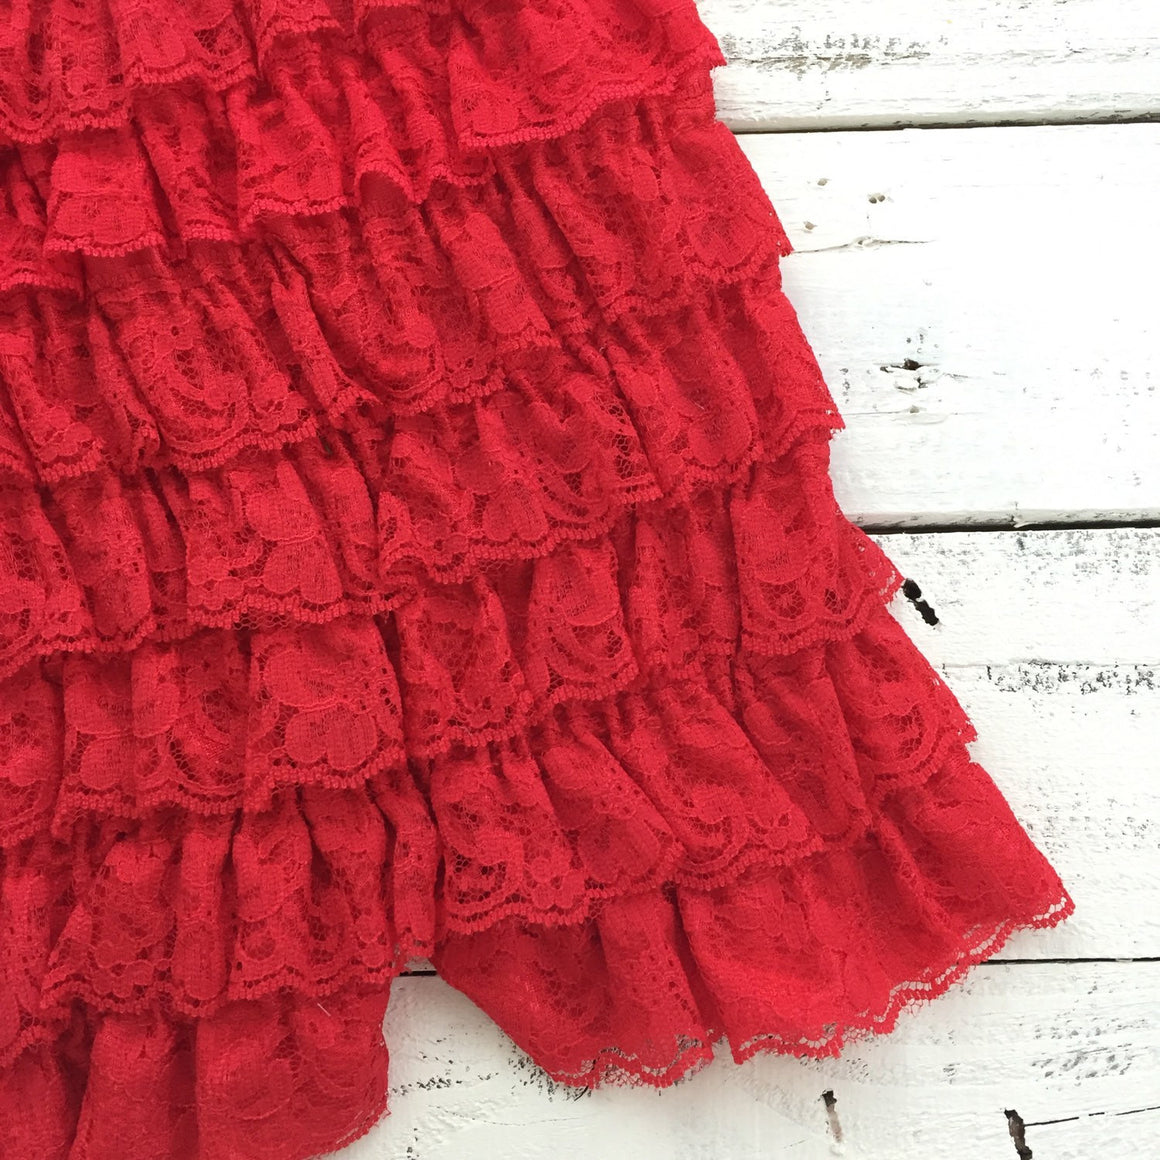 Lace Petti Romper - Embellished Christmas Red Lace Petti Romper and matching headband - HoneyLoveBoutique